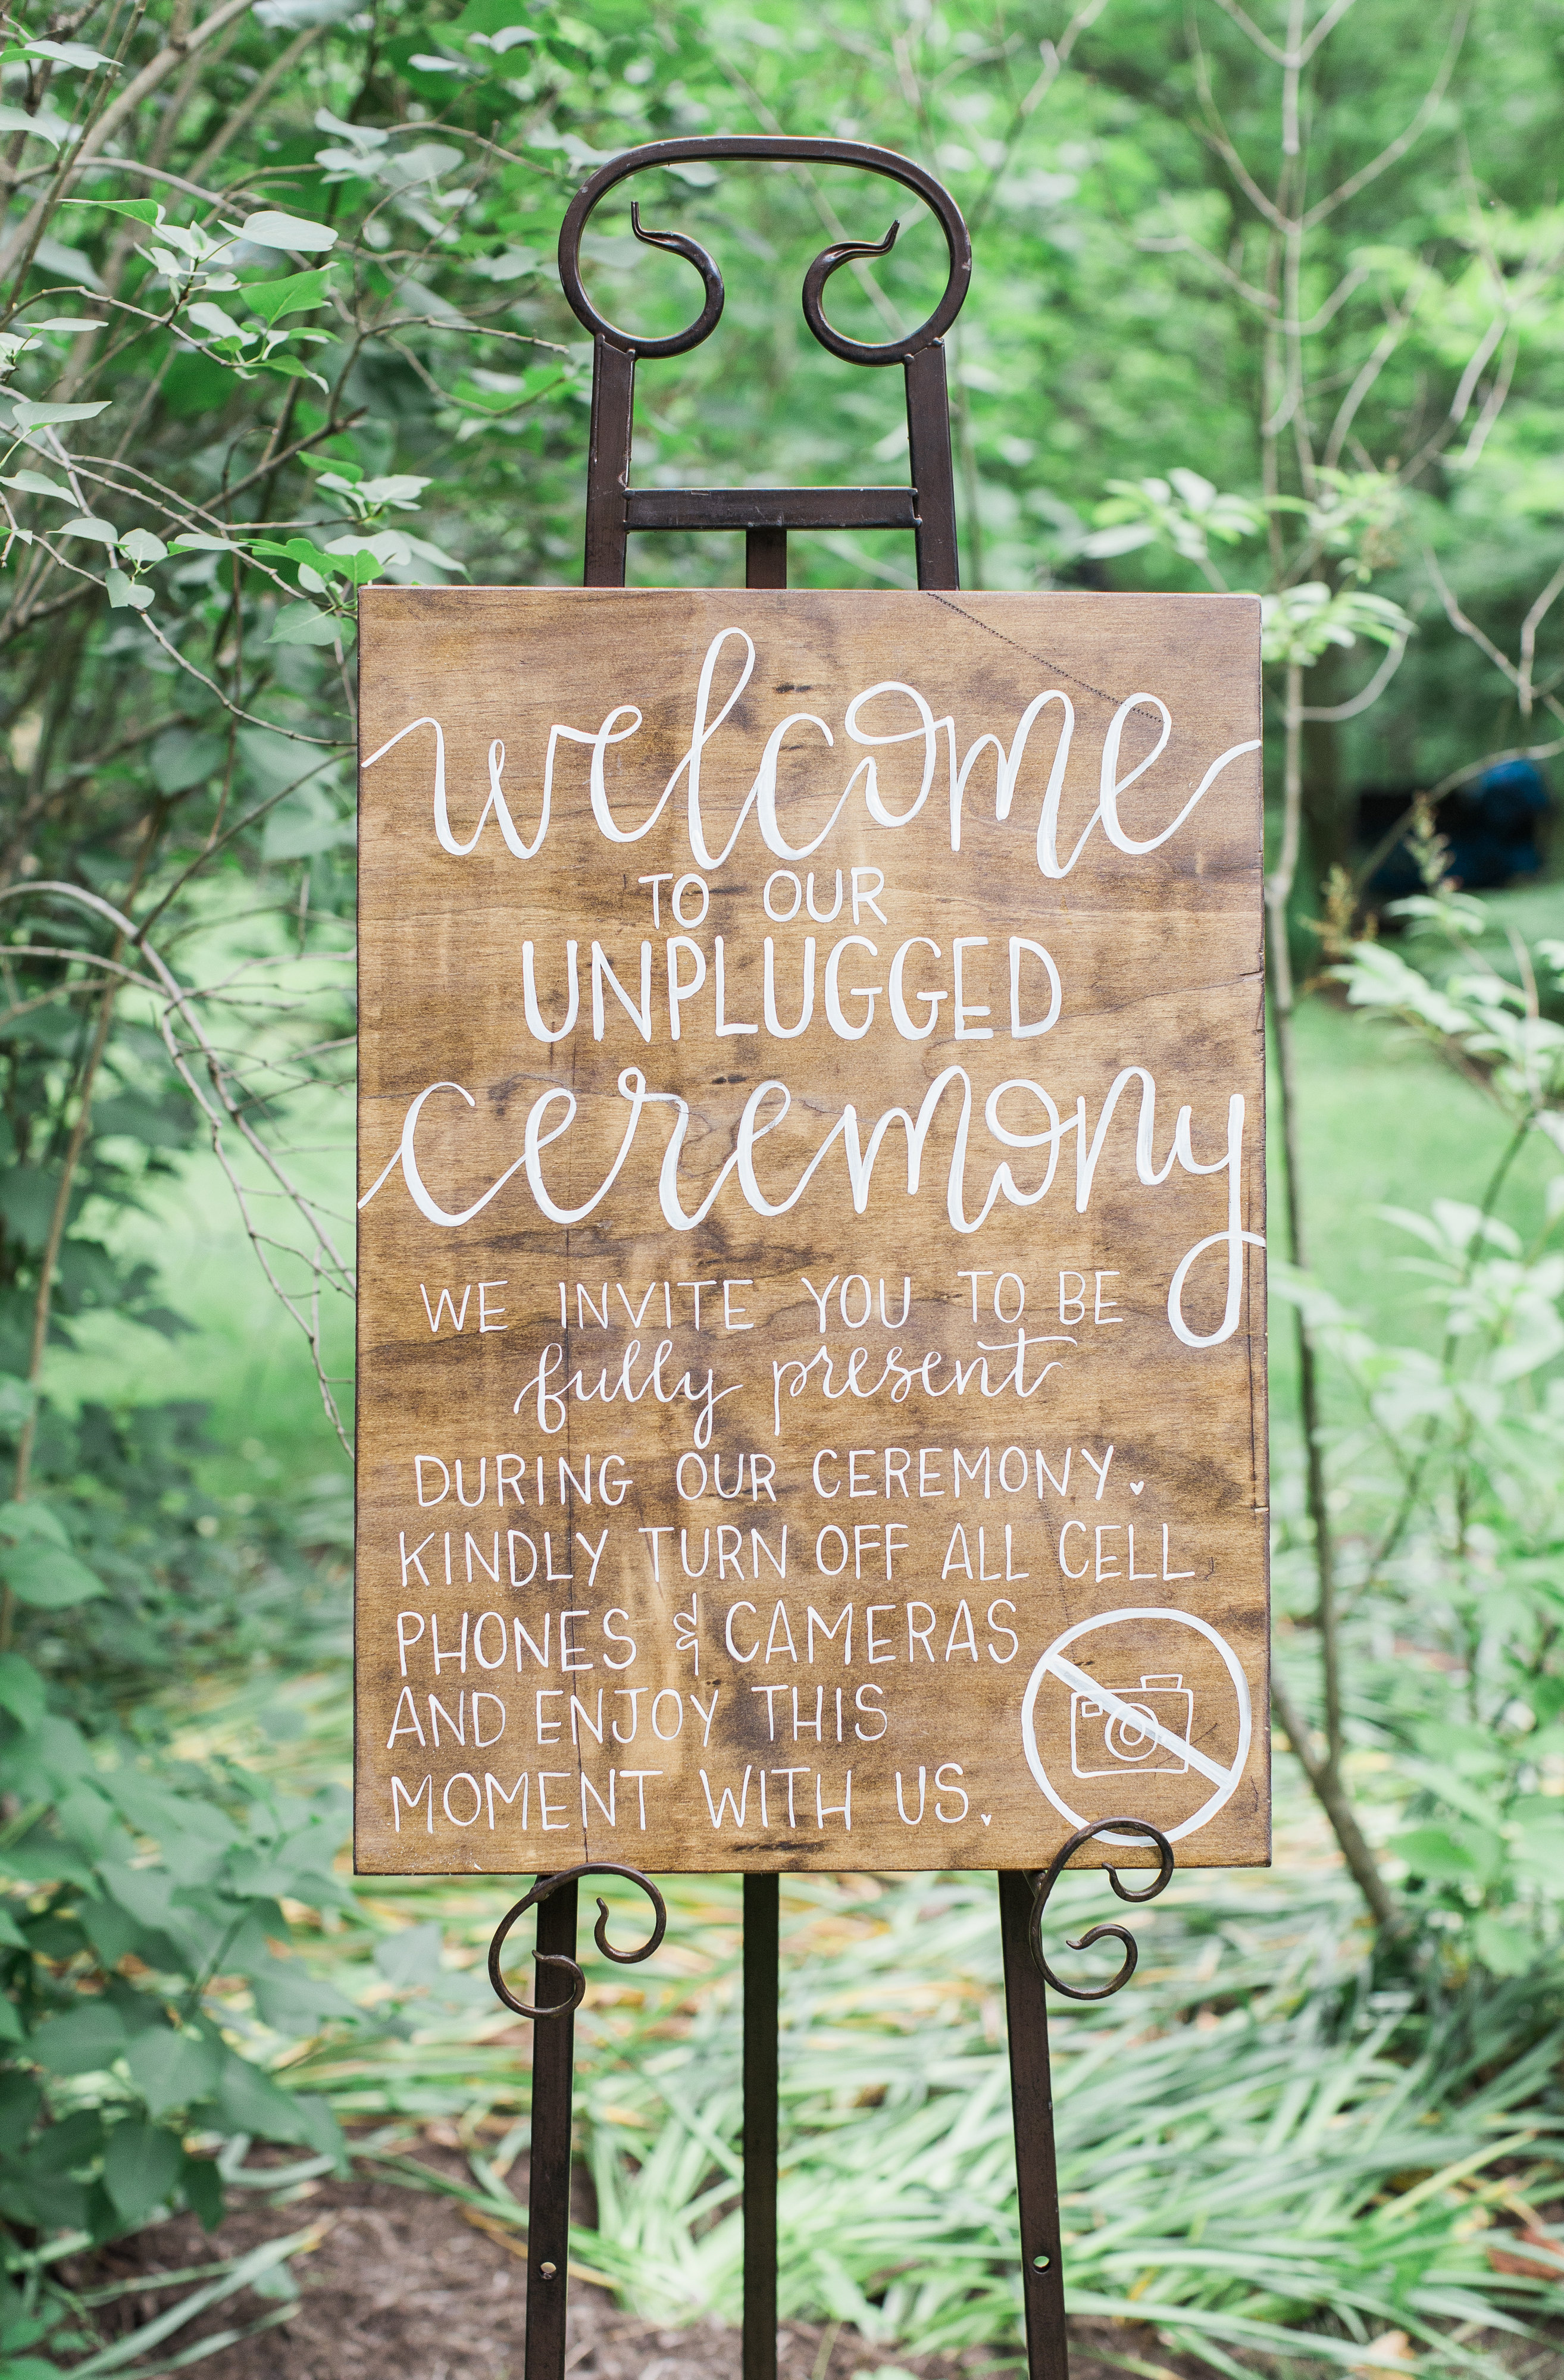 reason to have an unplugged wedding